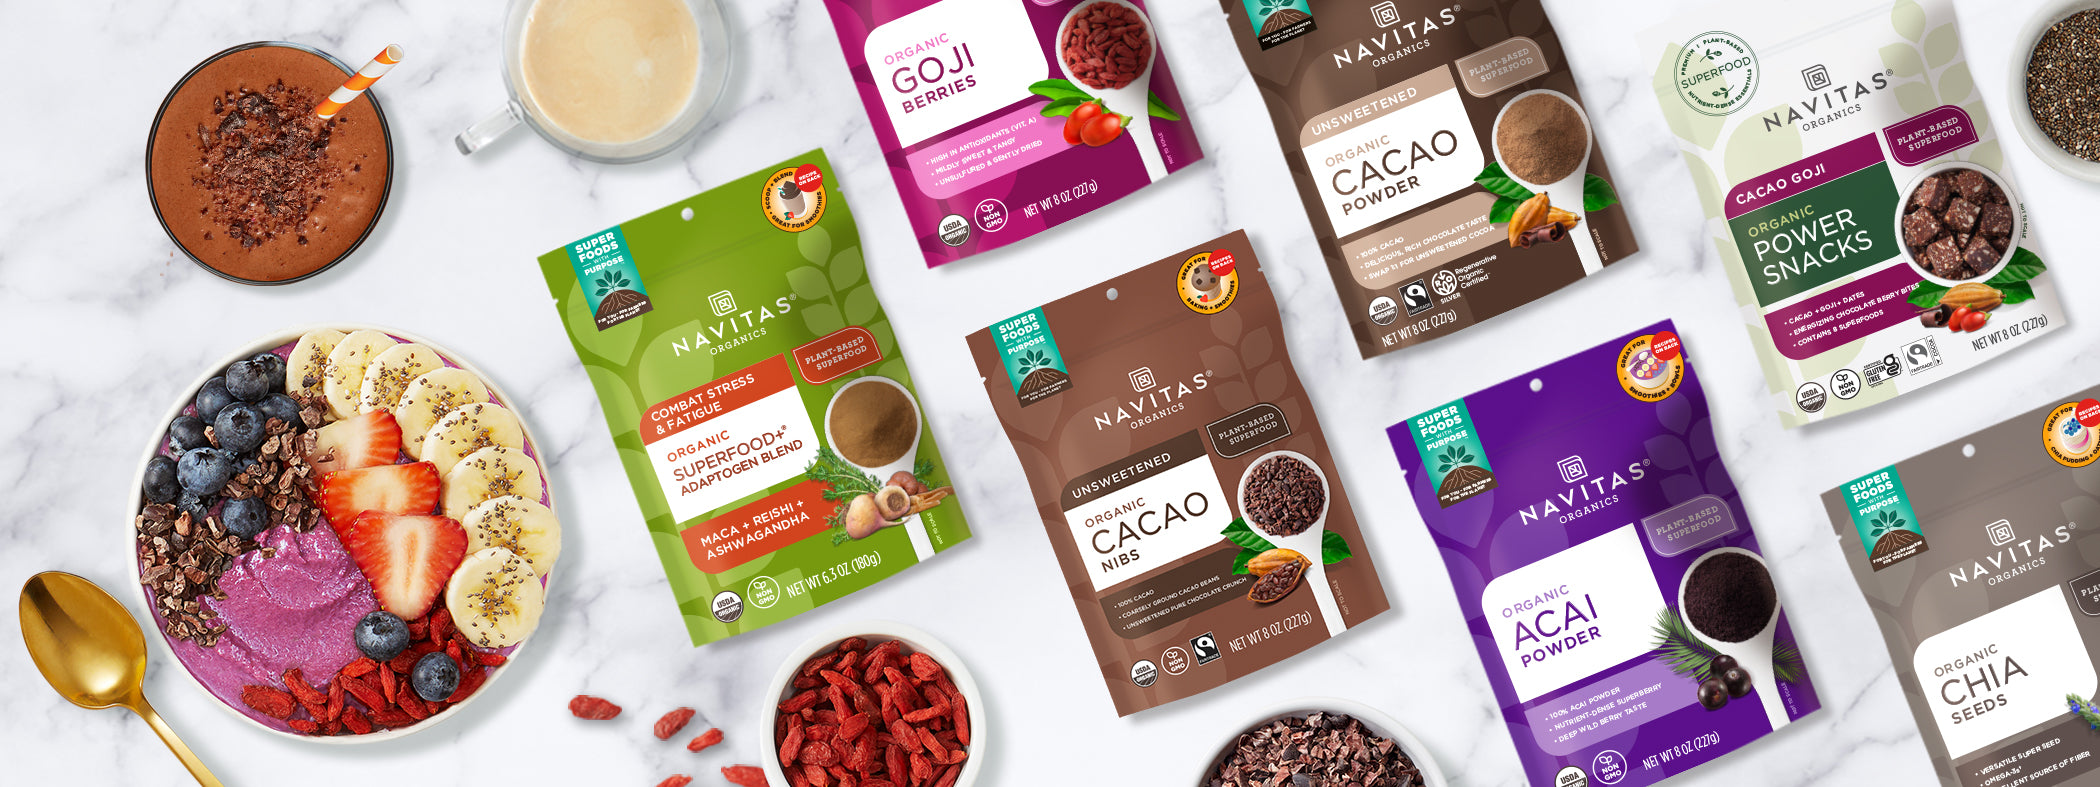 A variety of Navitas Organics superfoods, a smoothie bowl, smoothie and latte